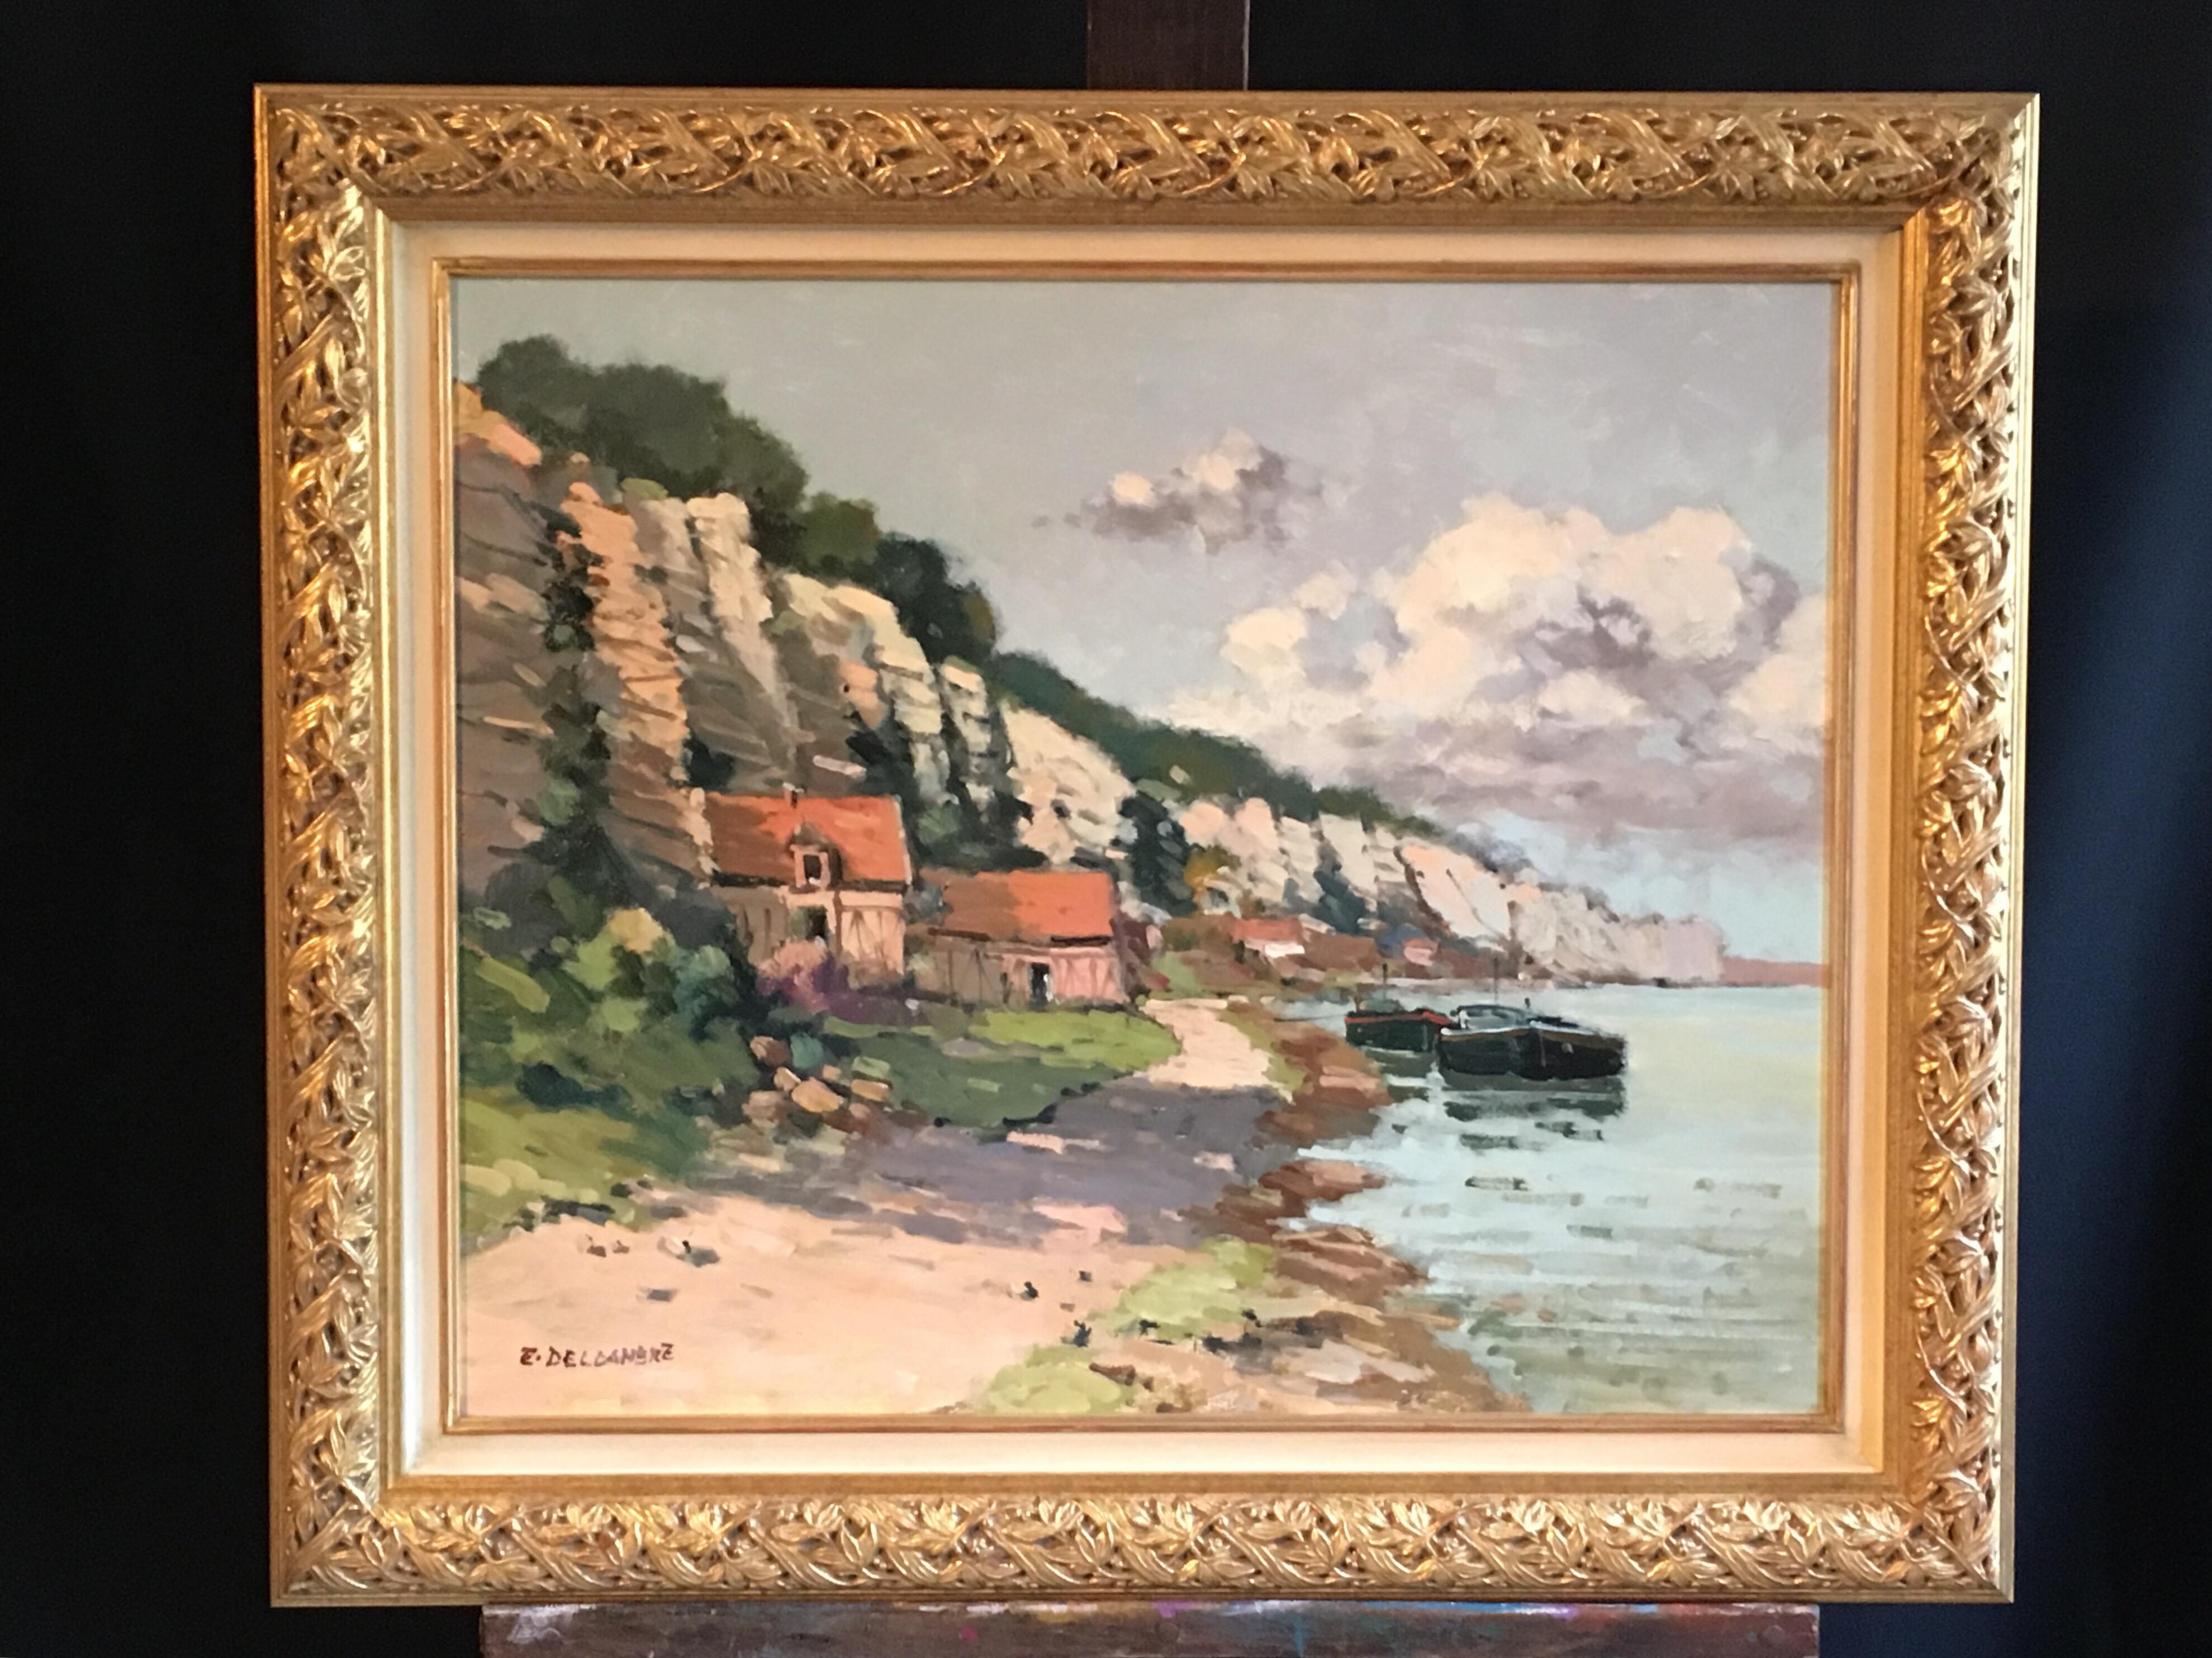 'La Seine Vers Orival' Landscape Impressionist Oil Painting, Signed
By French artist Elysee Delcambre, b. 1930
Signed by the artist on the lower left hand corner
Signed and titled verso
Oil painting on canvas, framed
Framed size: 24 x 27.5 inches